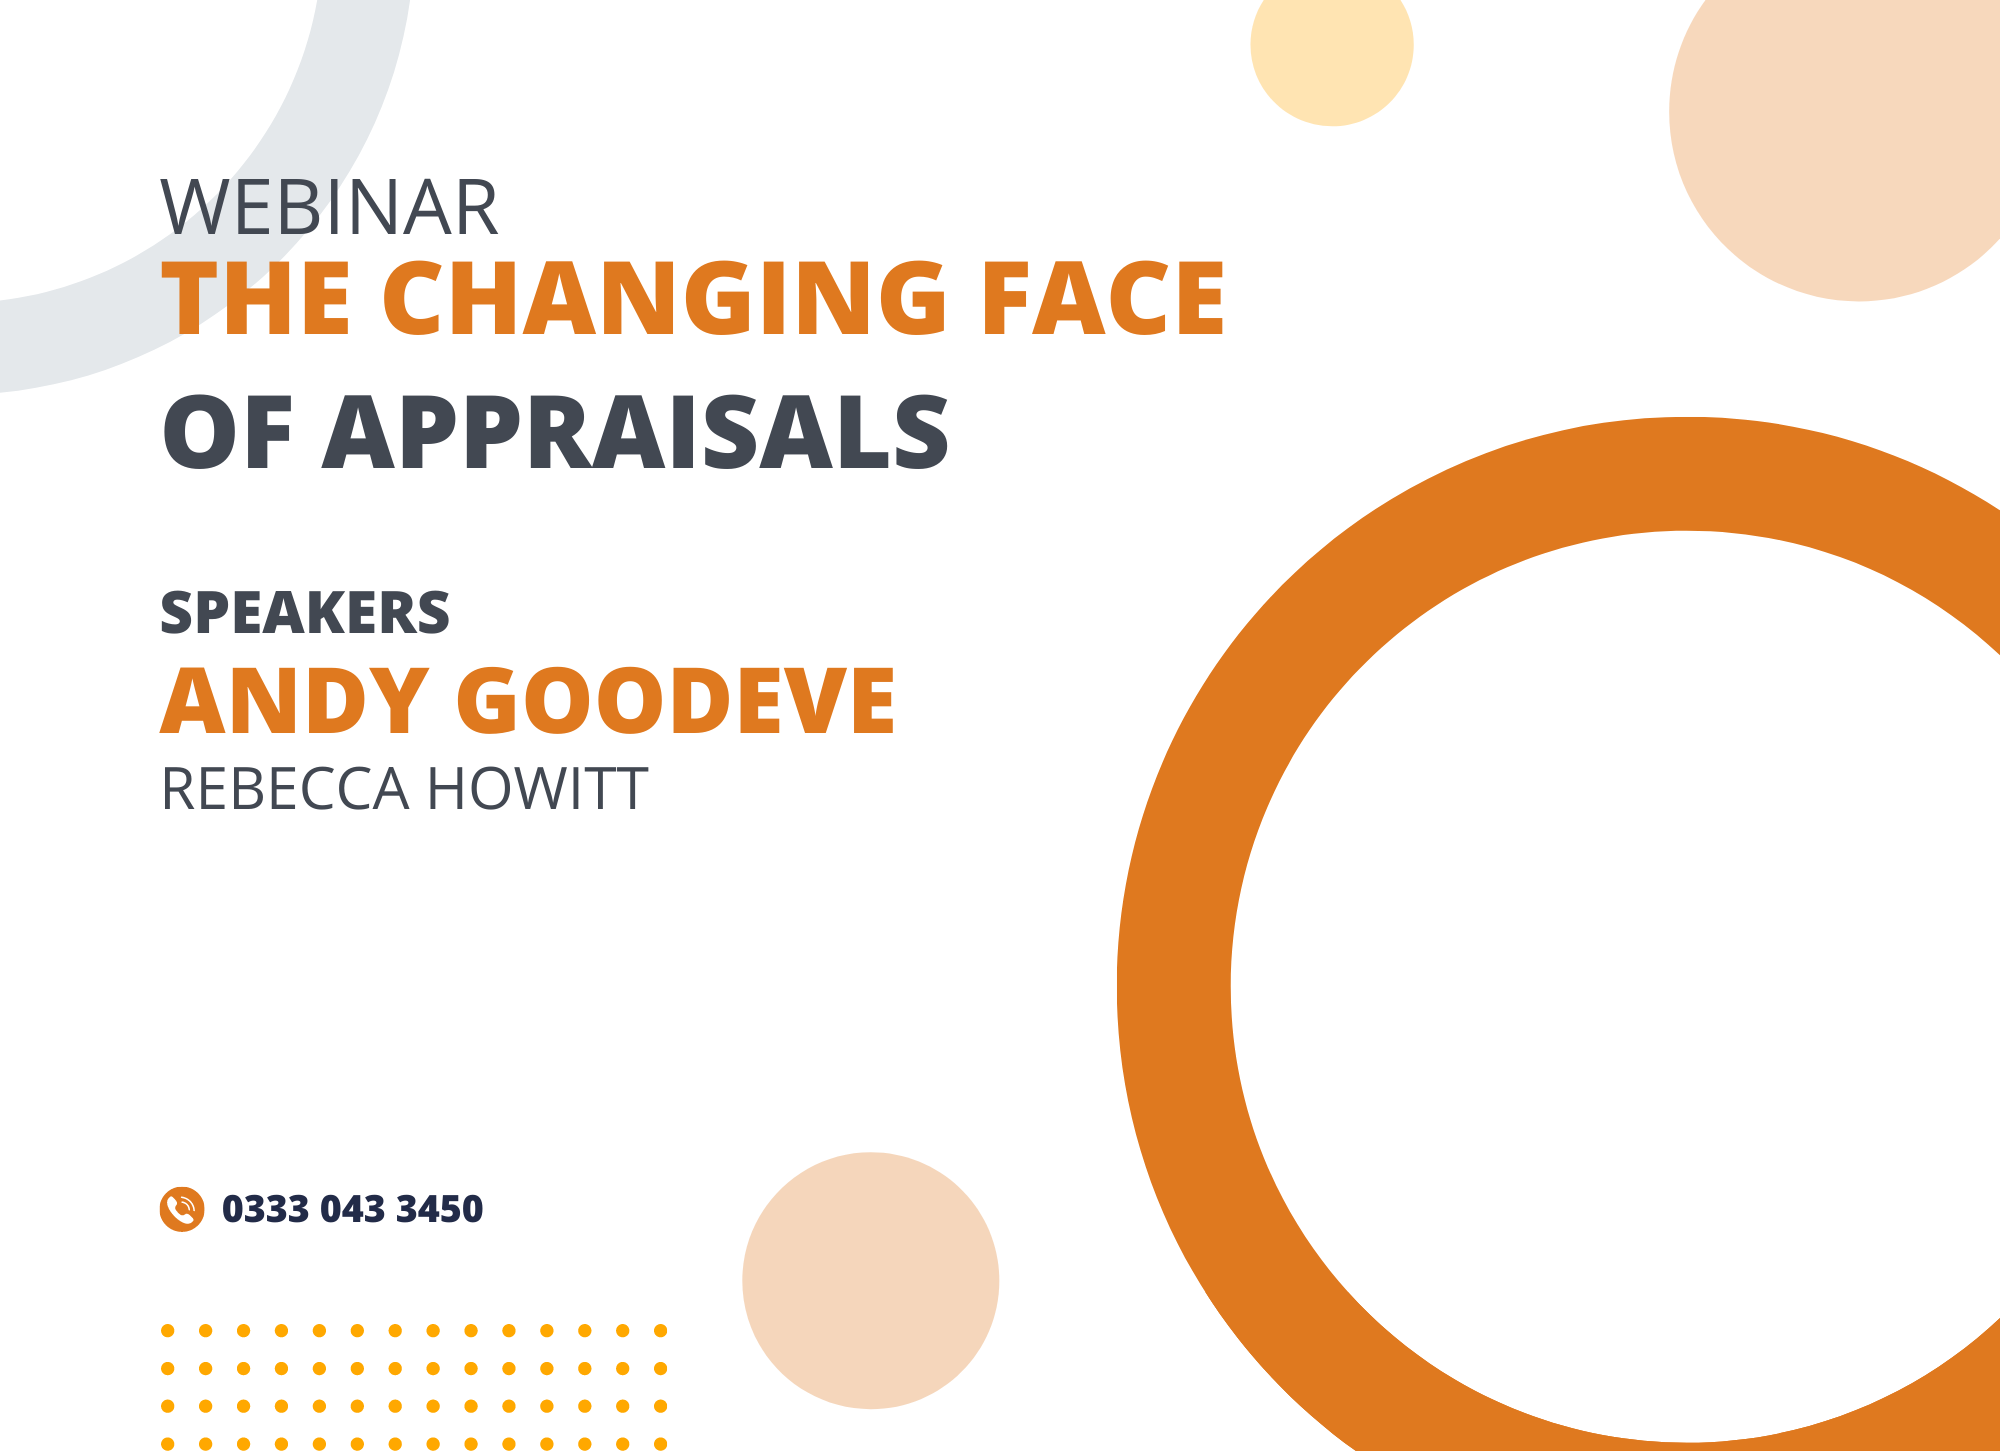 The changing face of appraisals